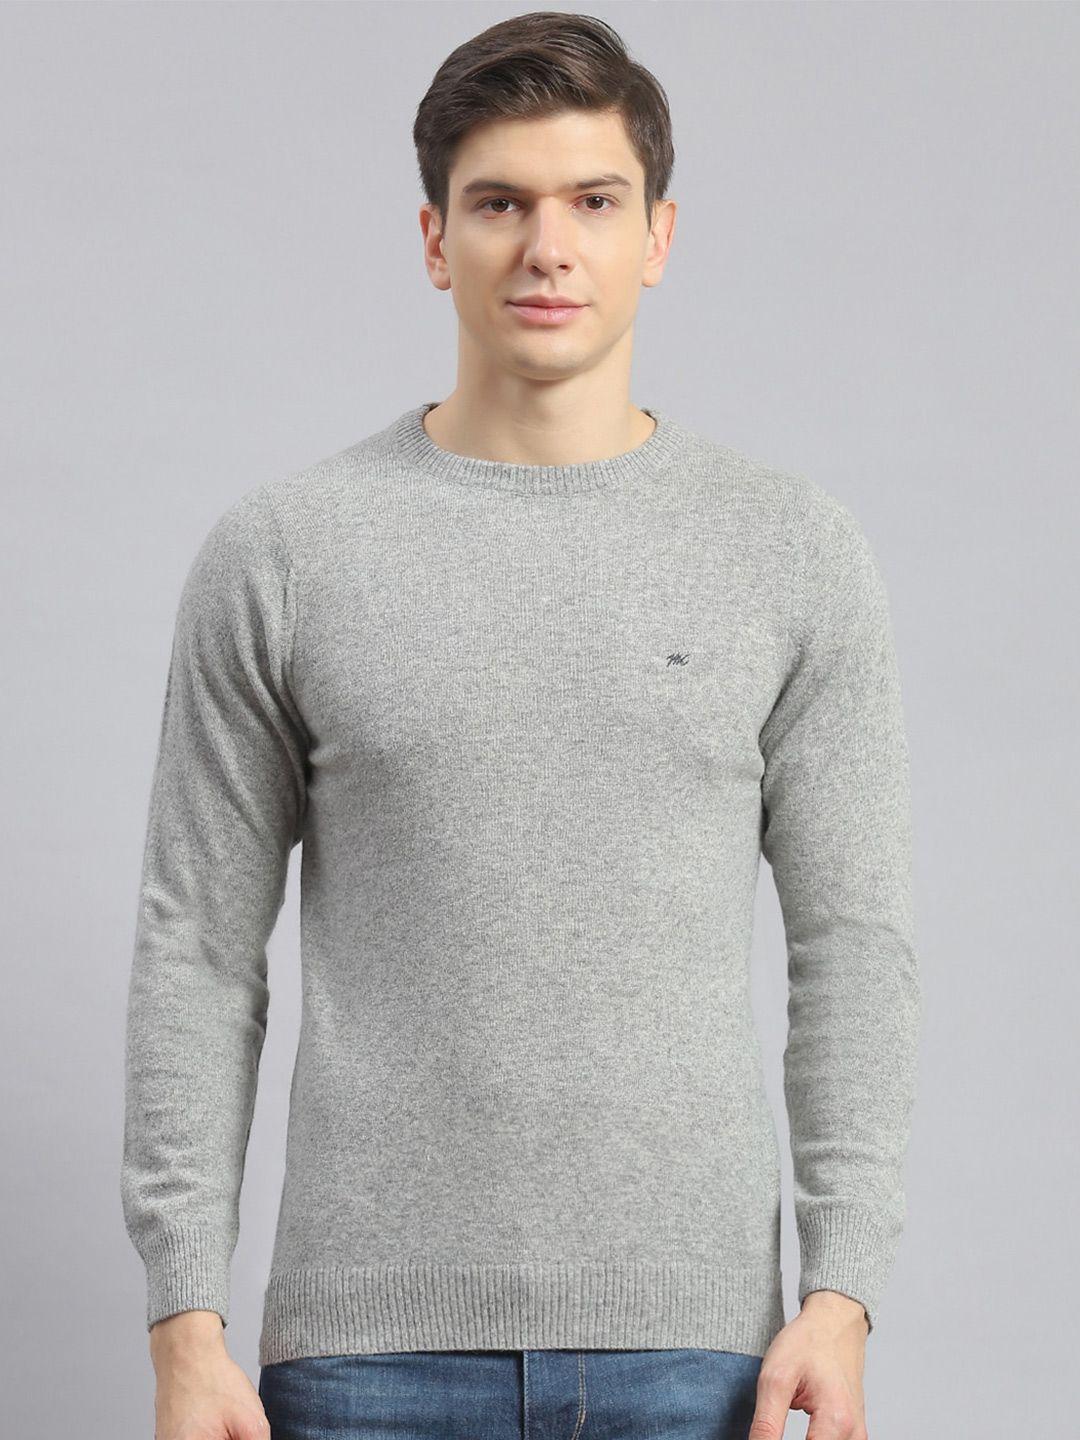 monte carlo round neck woollen pullover ribbed sweaters